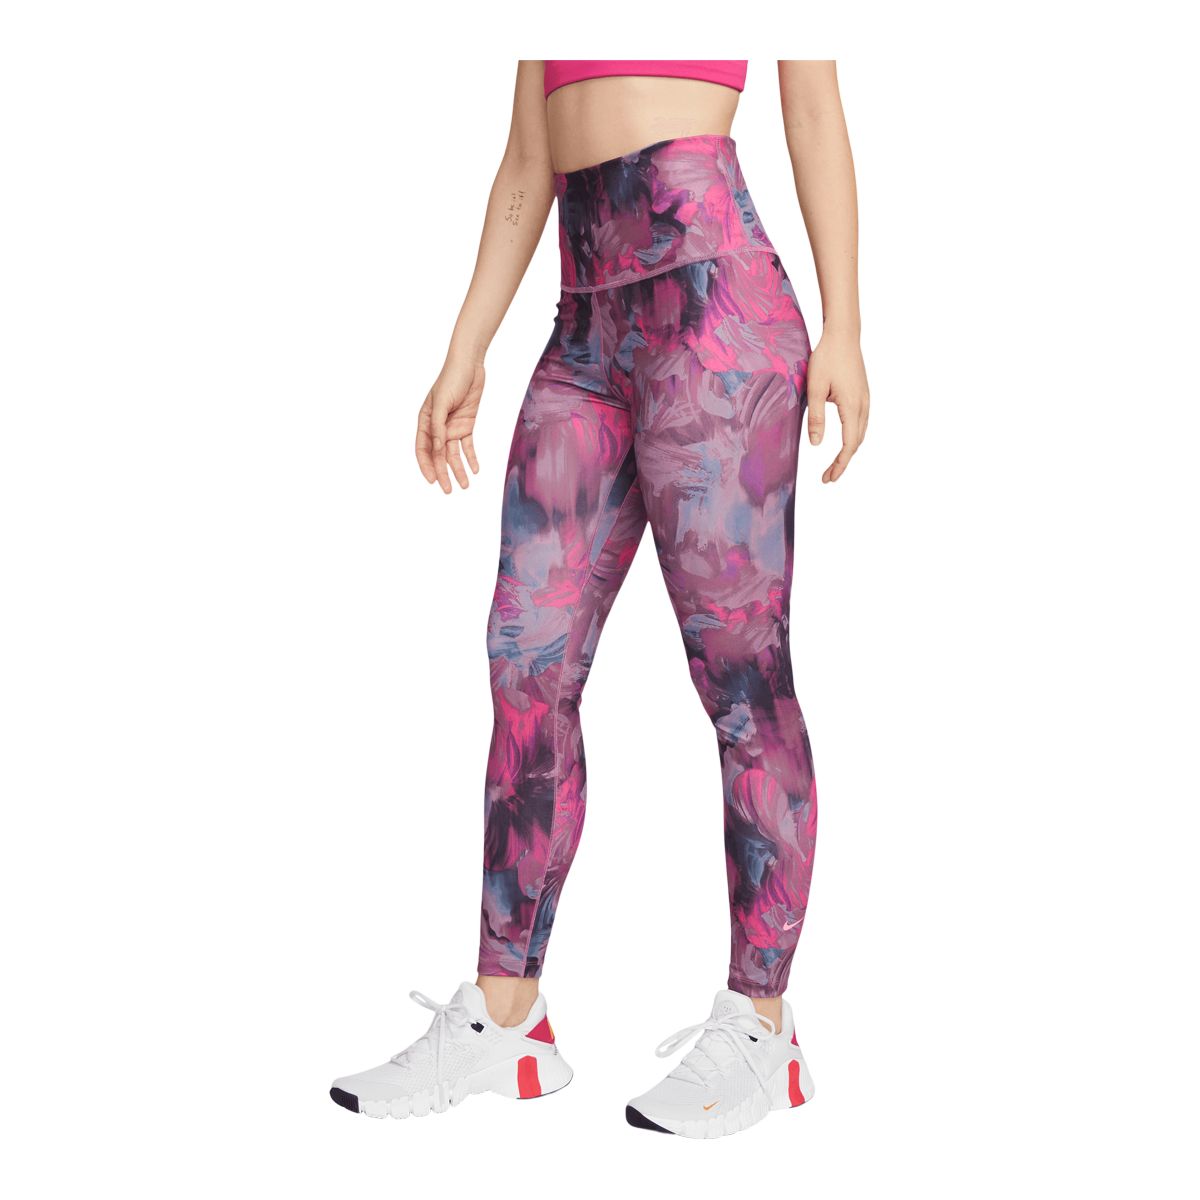 Nike Women's One Dri-FIT High Rise 7/8 All Over Print Tights